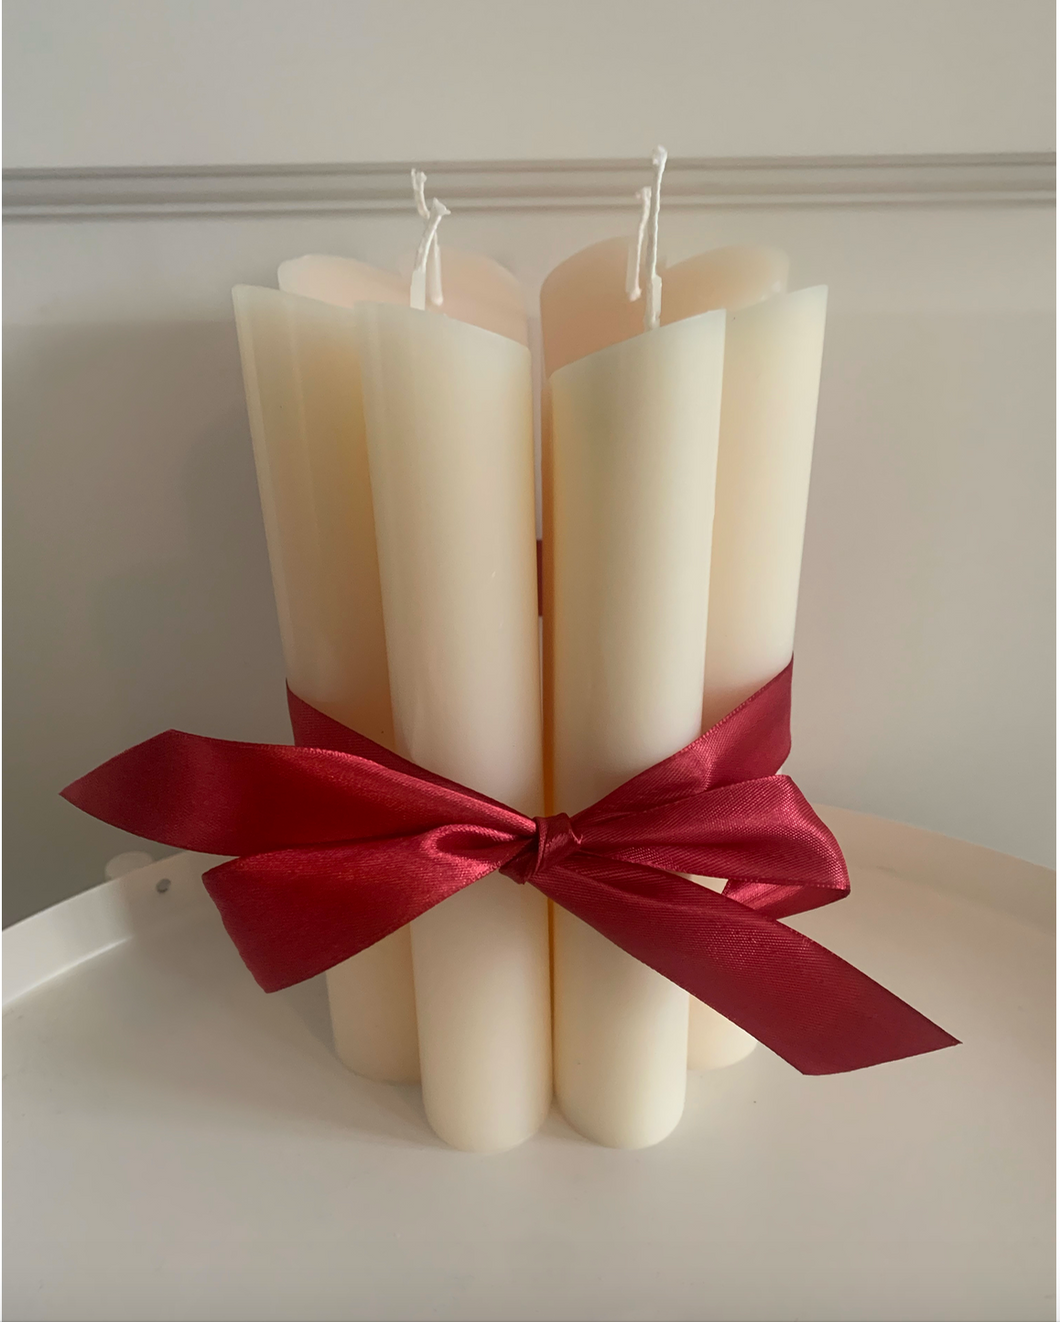 LARGE HEART COLUMN CANDLE